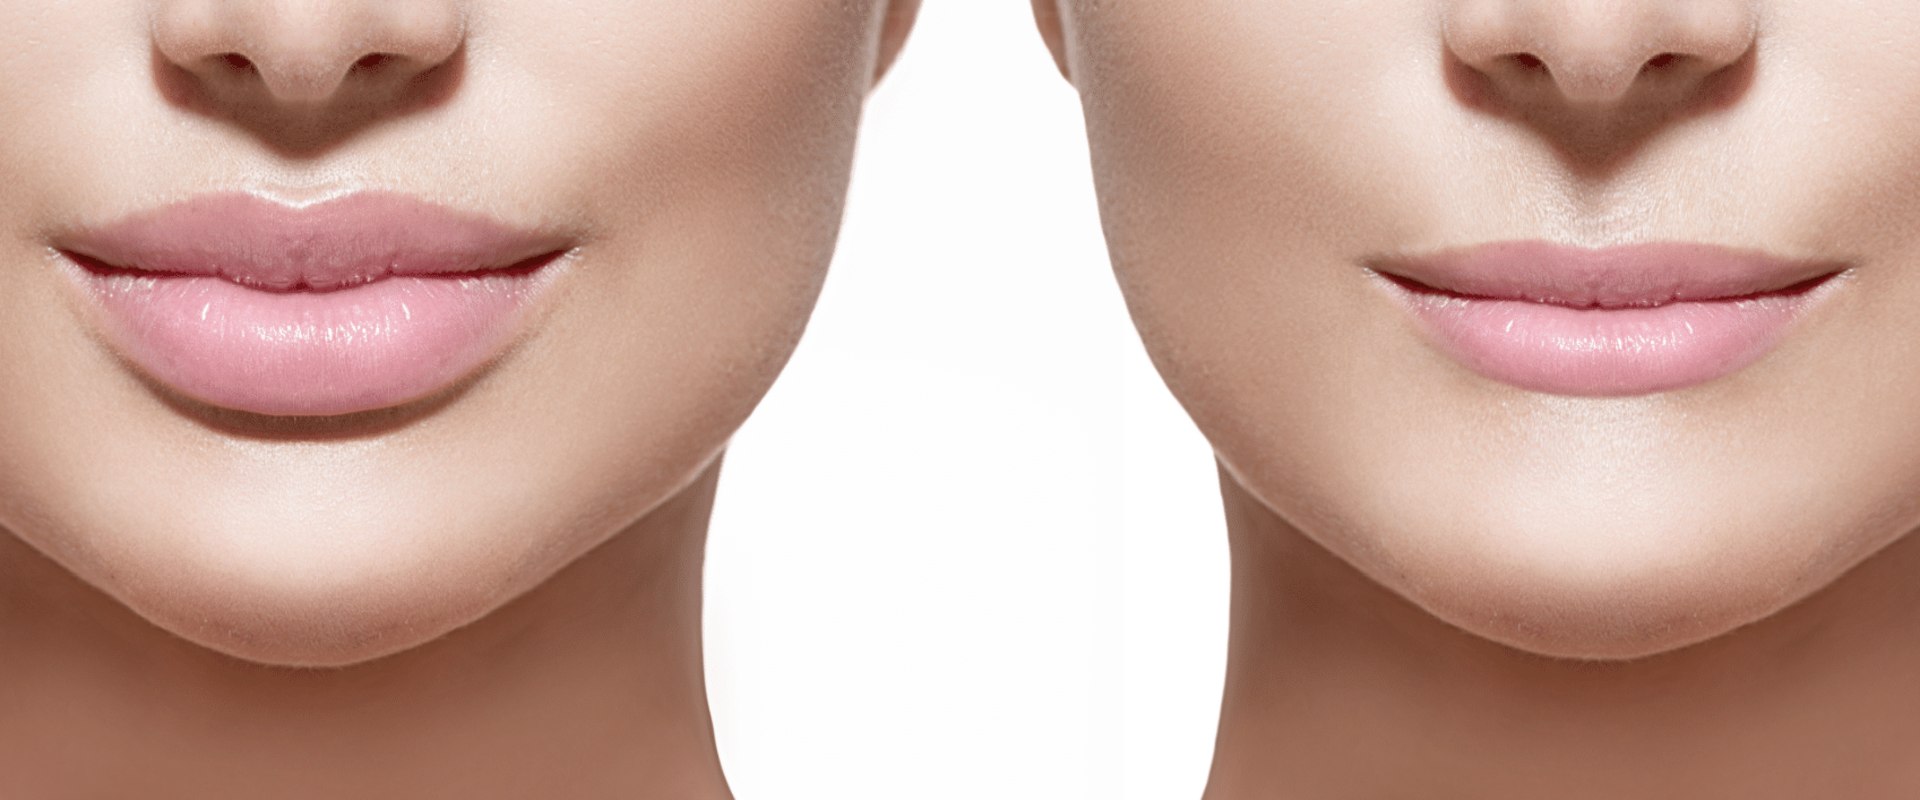 Which juvederm is used for lips?